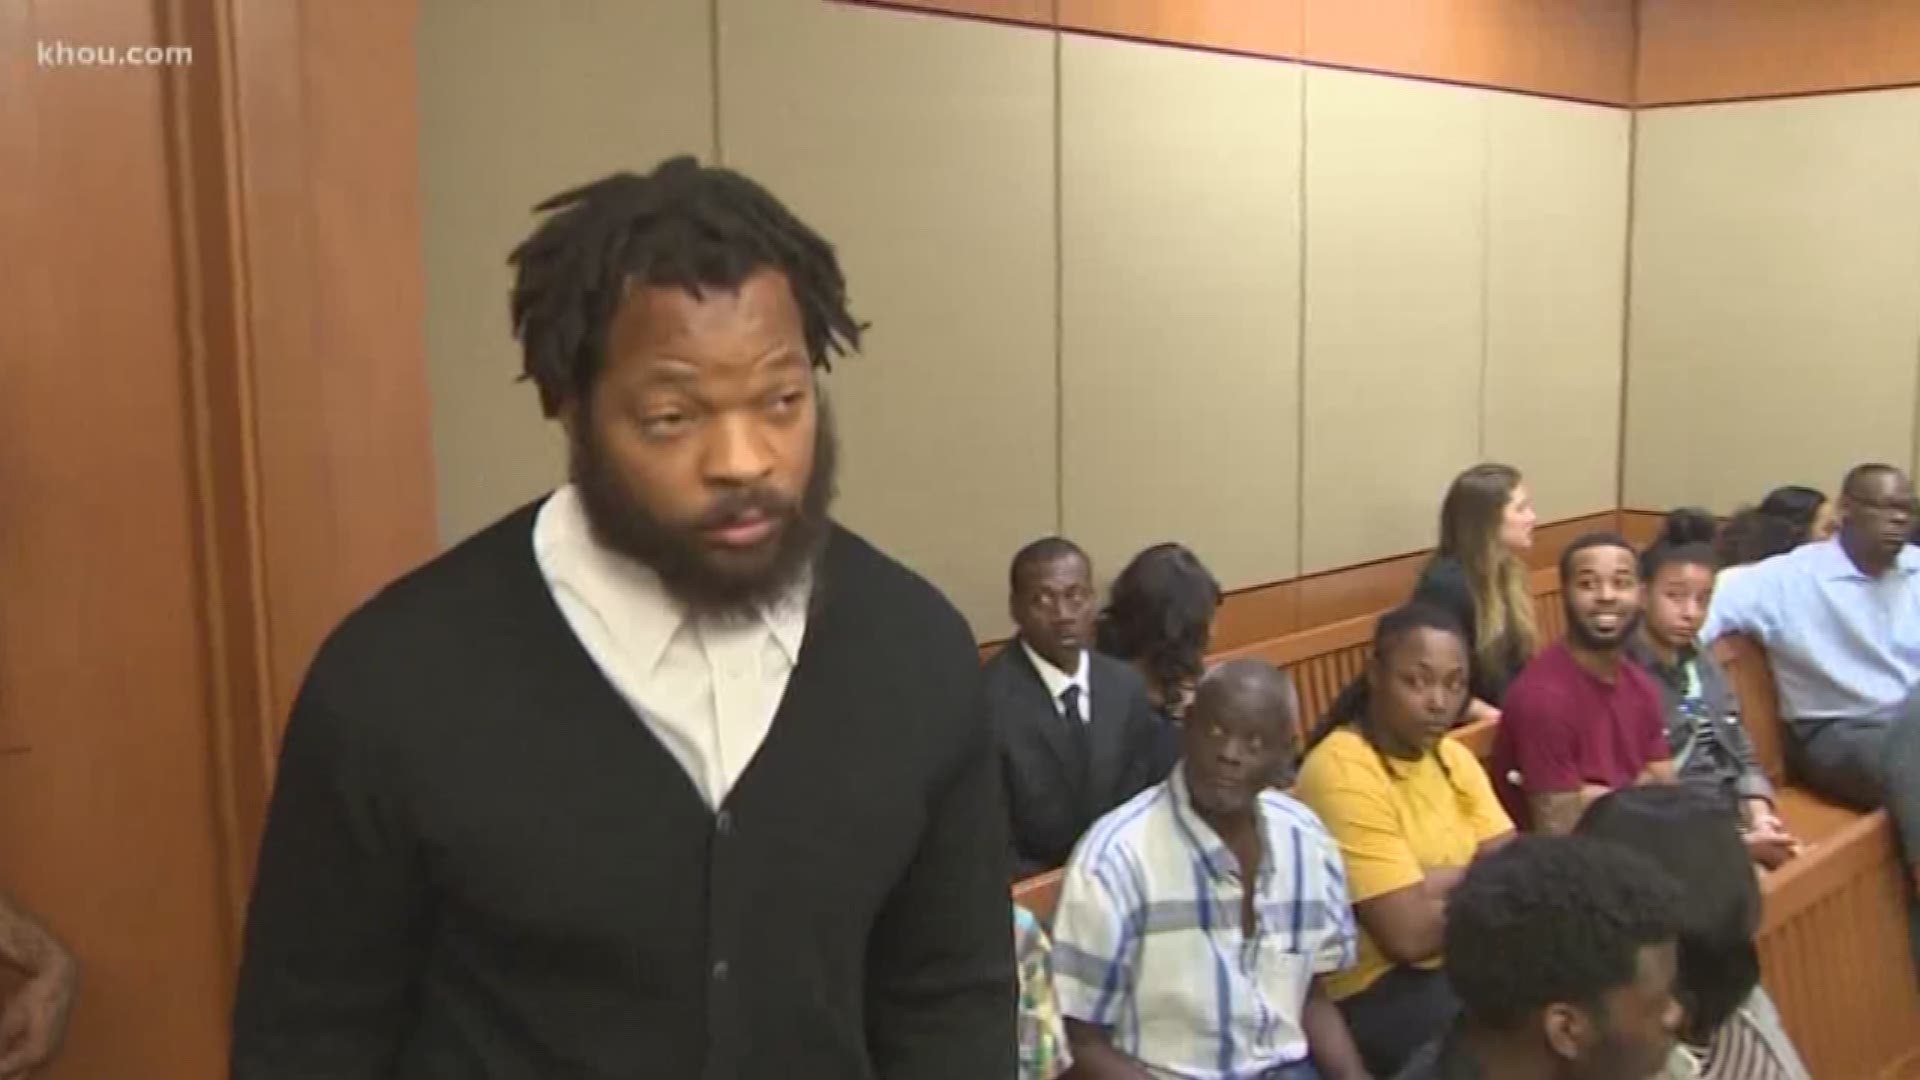 The felony charge against NFL player Michael Bennett, following an incident at Super Bowl LI in Houston, have been dismissed.

Bennett was indicted in March 2018 by a Harris County grand jury for the felony charge of injury to the elderly.

A 66-year-old NRG security guard, who uses a wheelchair, said Bennett pushed her arm as he made his way through a crowd.